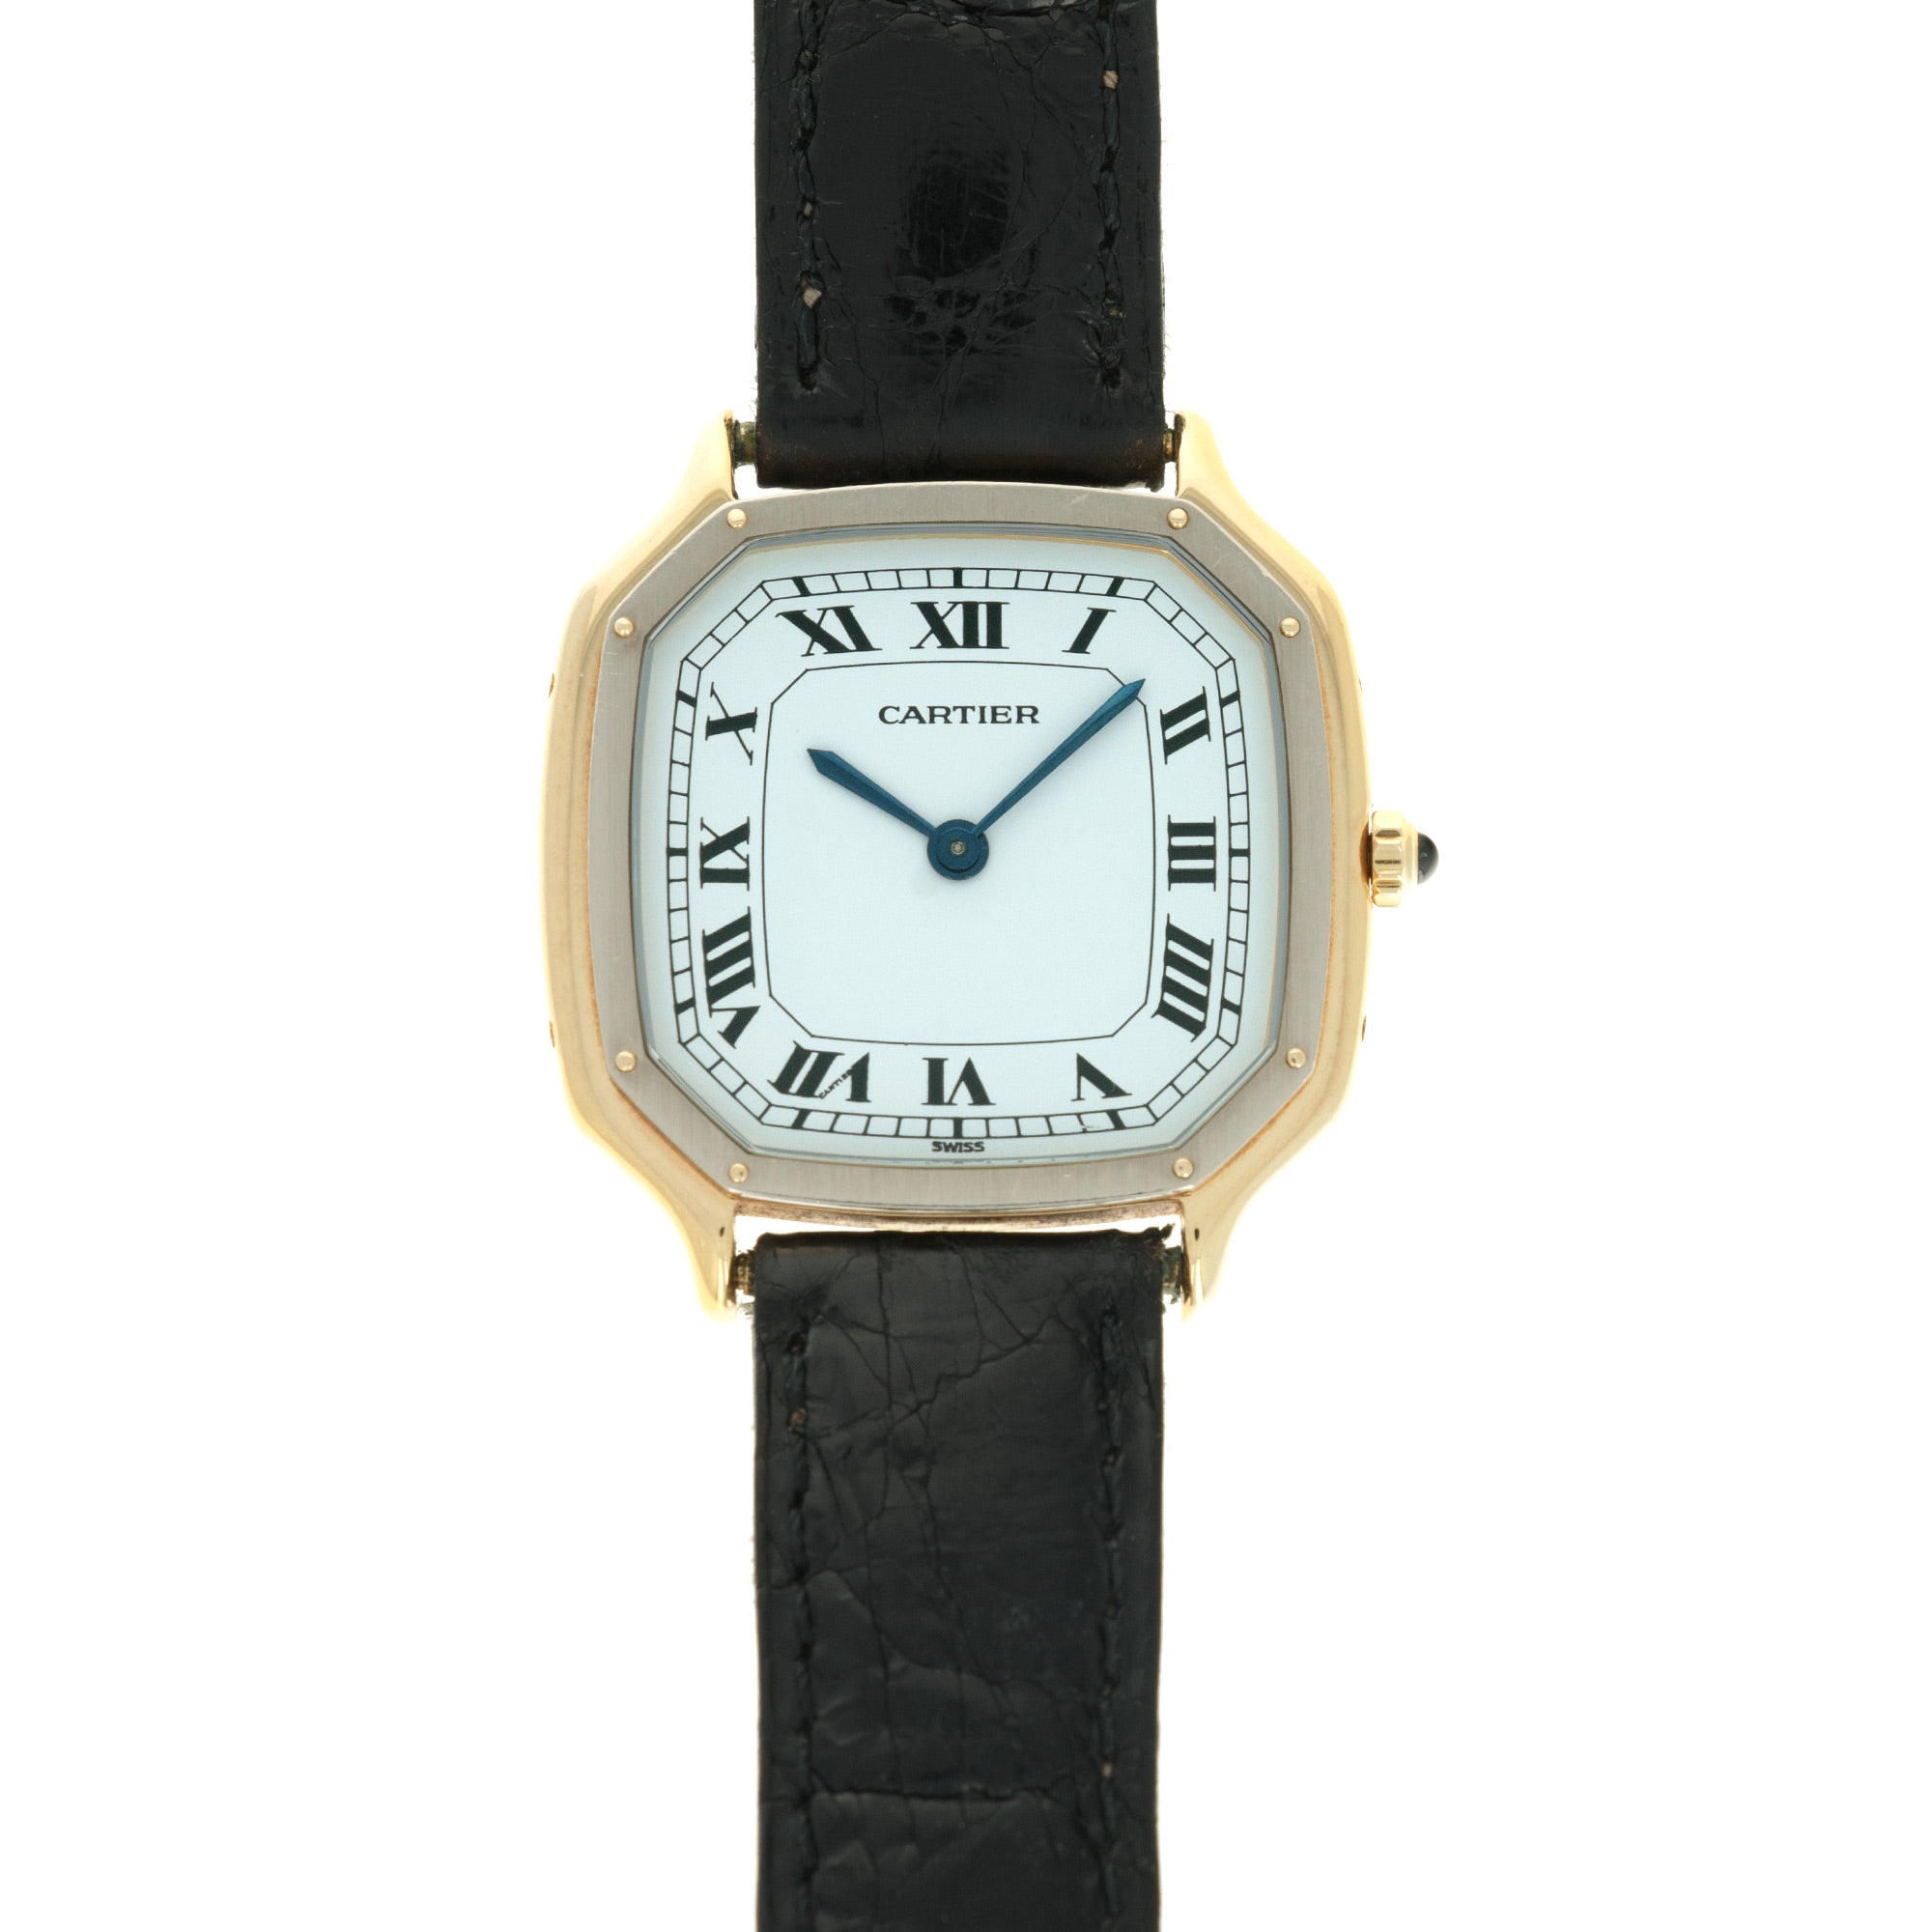 Cartier - Cartier Yellow & White Gold Cushion Trianon Strap Watch - The Keystone Watches